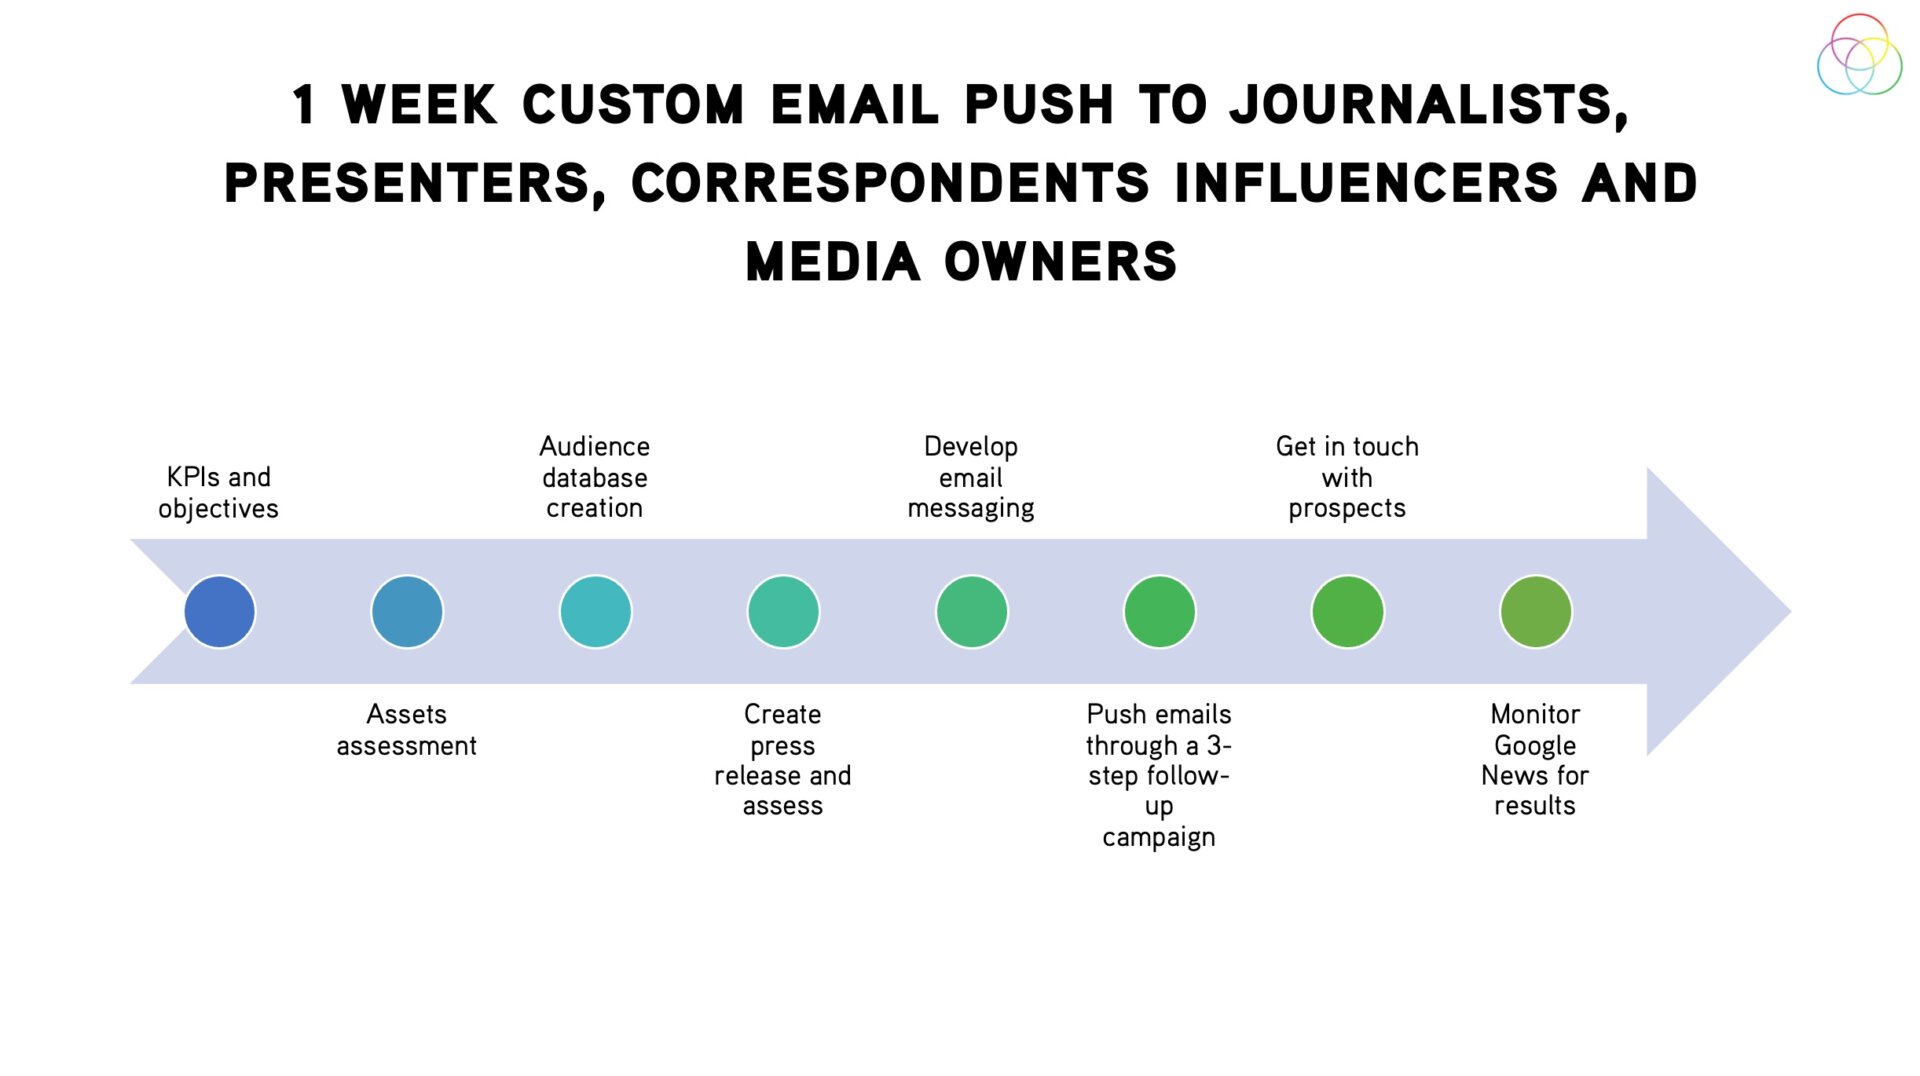 1 week custom email push to journalists, presenters, correspondents influencers and media owners